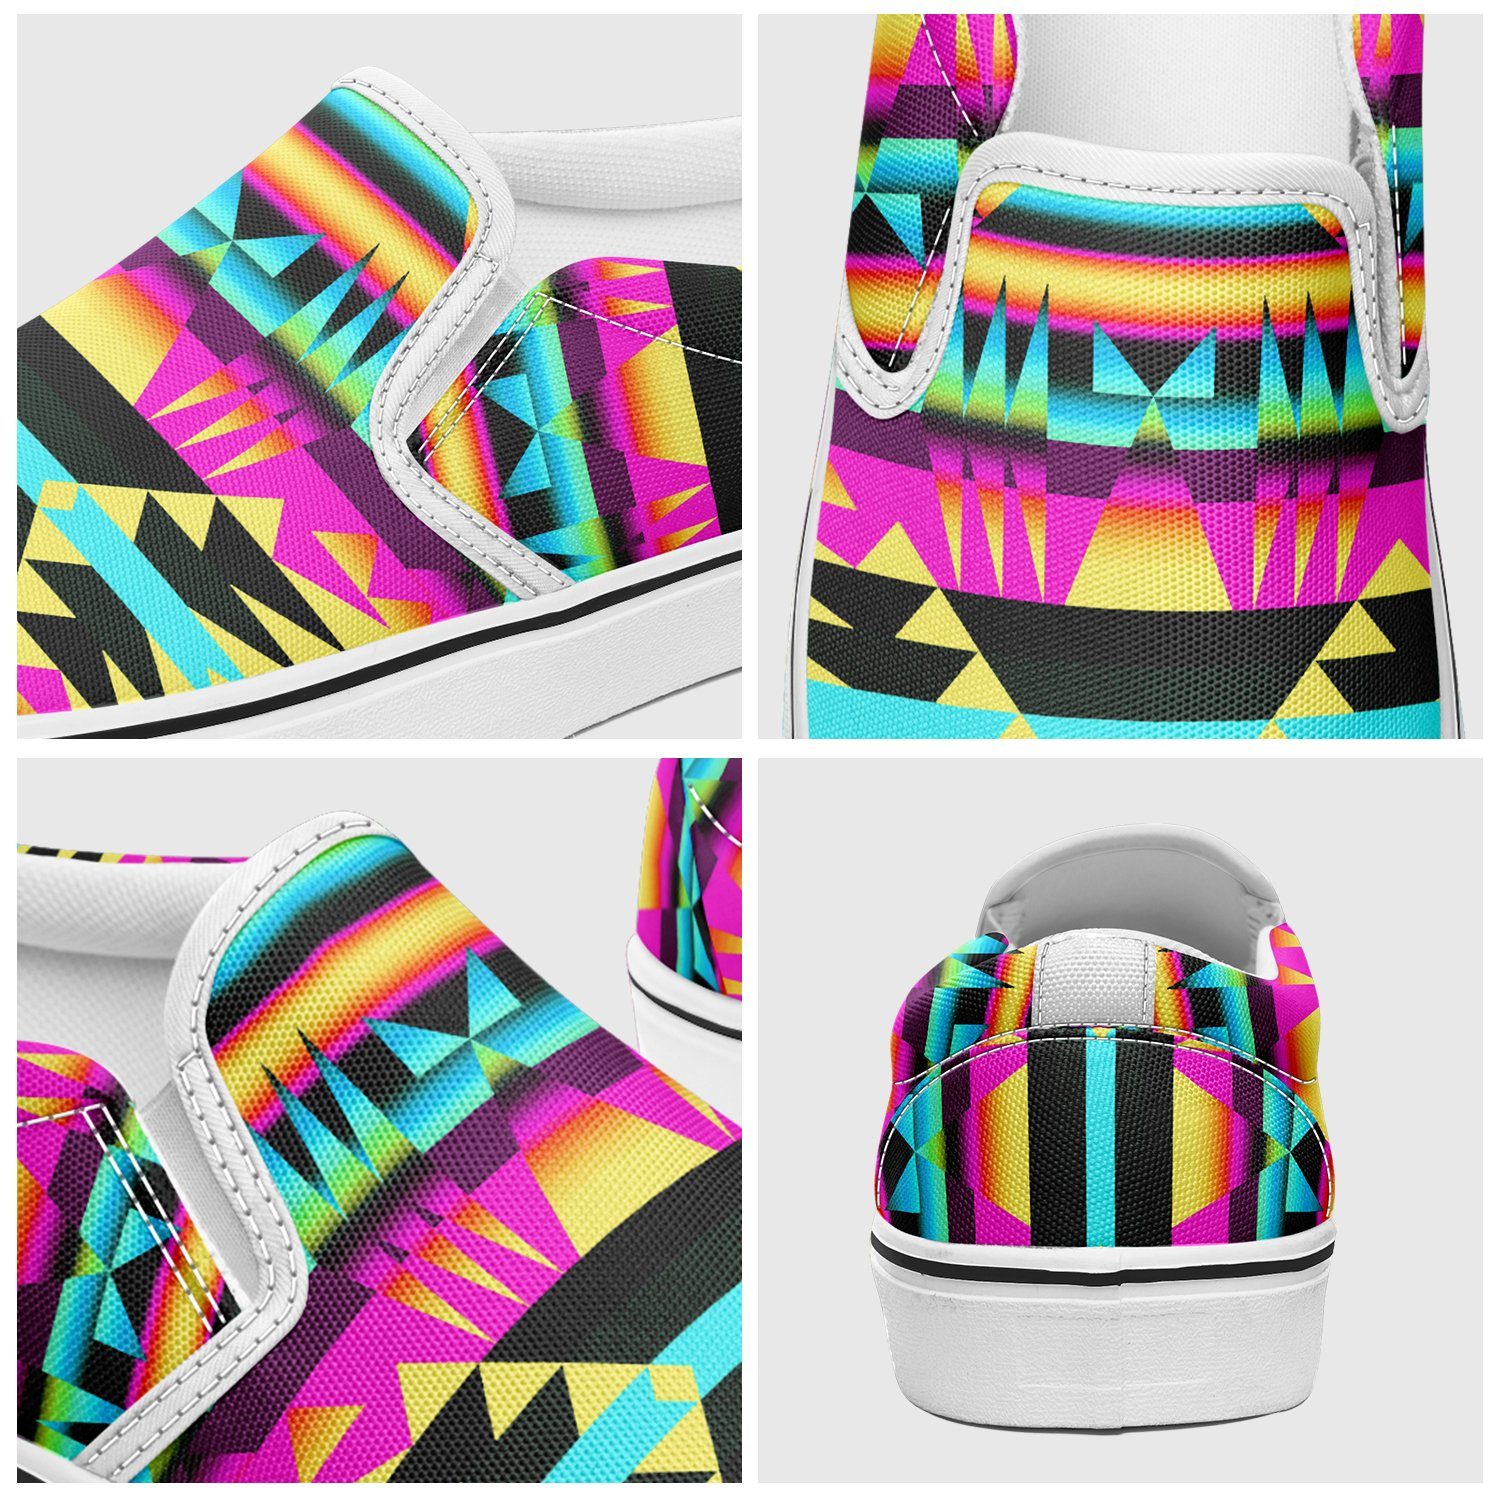 Between the Sunset Mountains Otoyimm Canvas Slip On Shoes 49 Dzine 